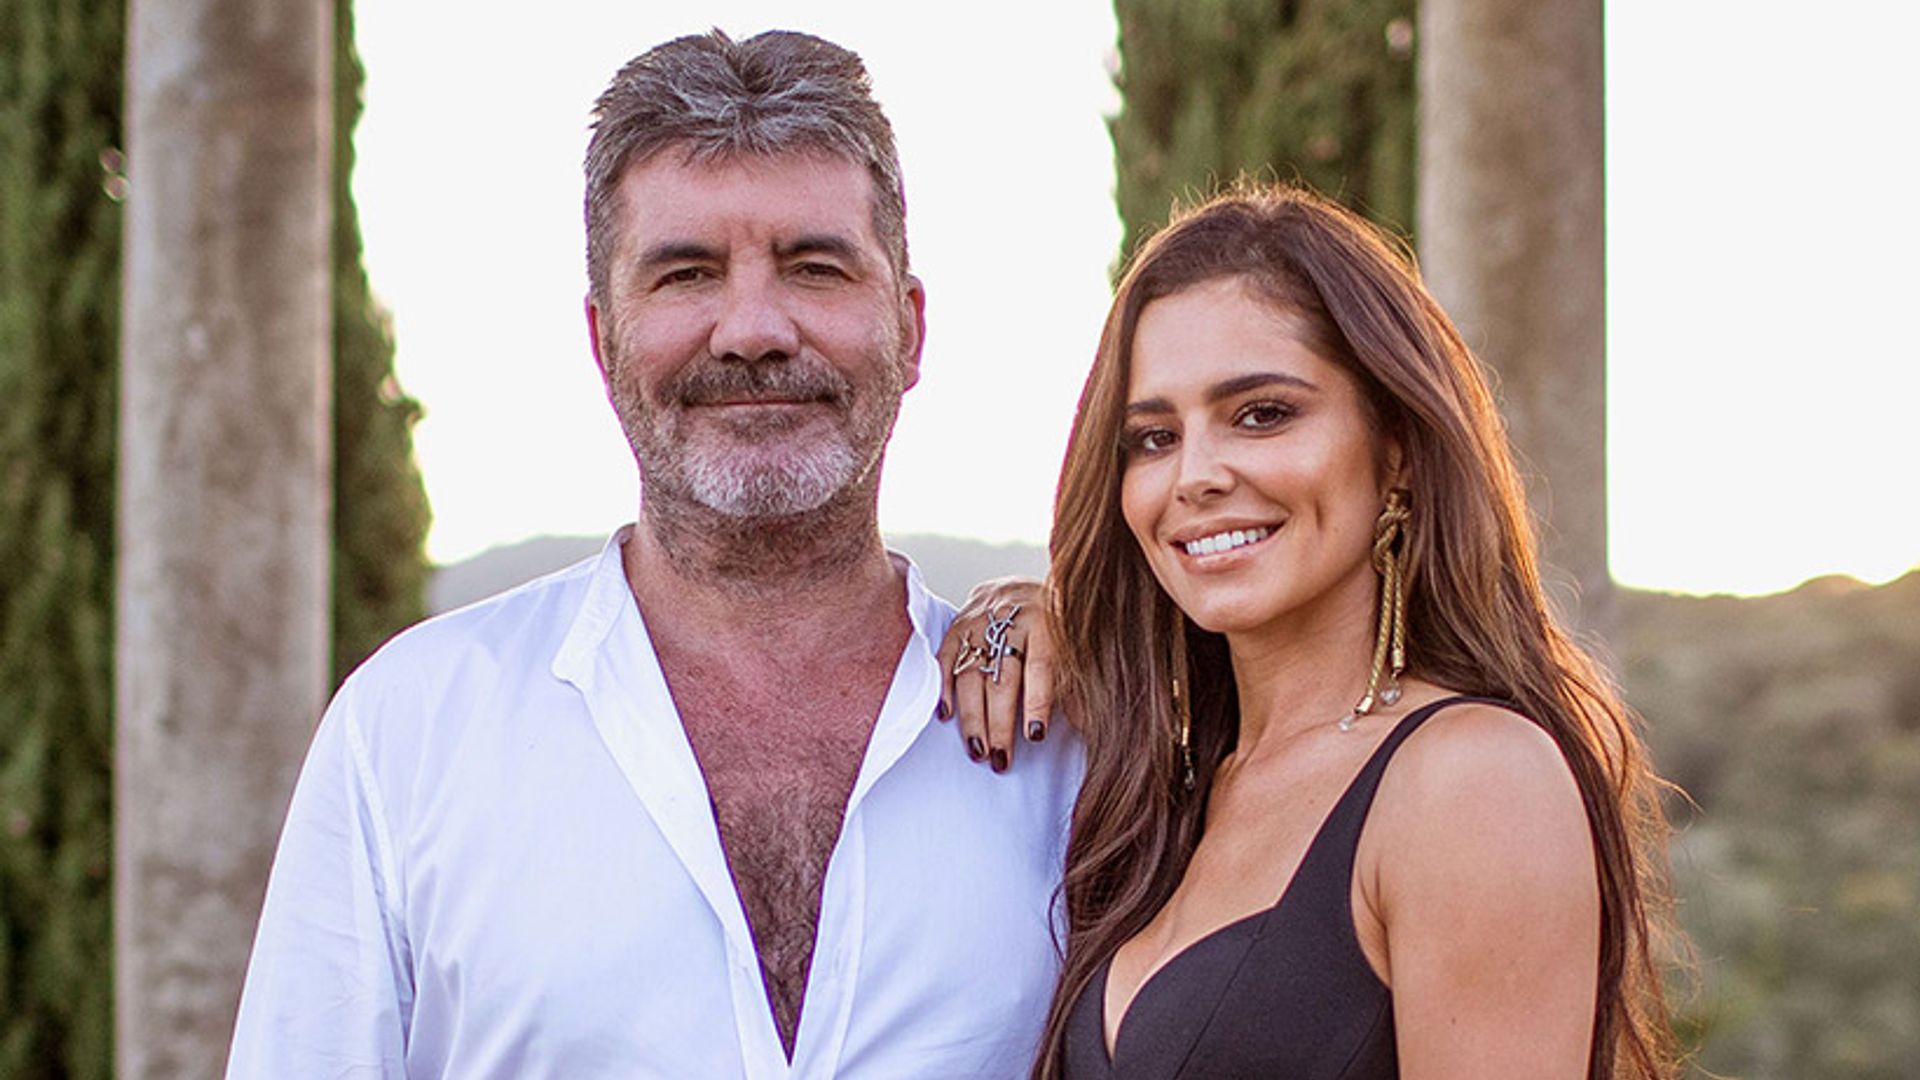 It’s official! Cheryl to join Simon Cowell on X Factor